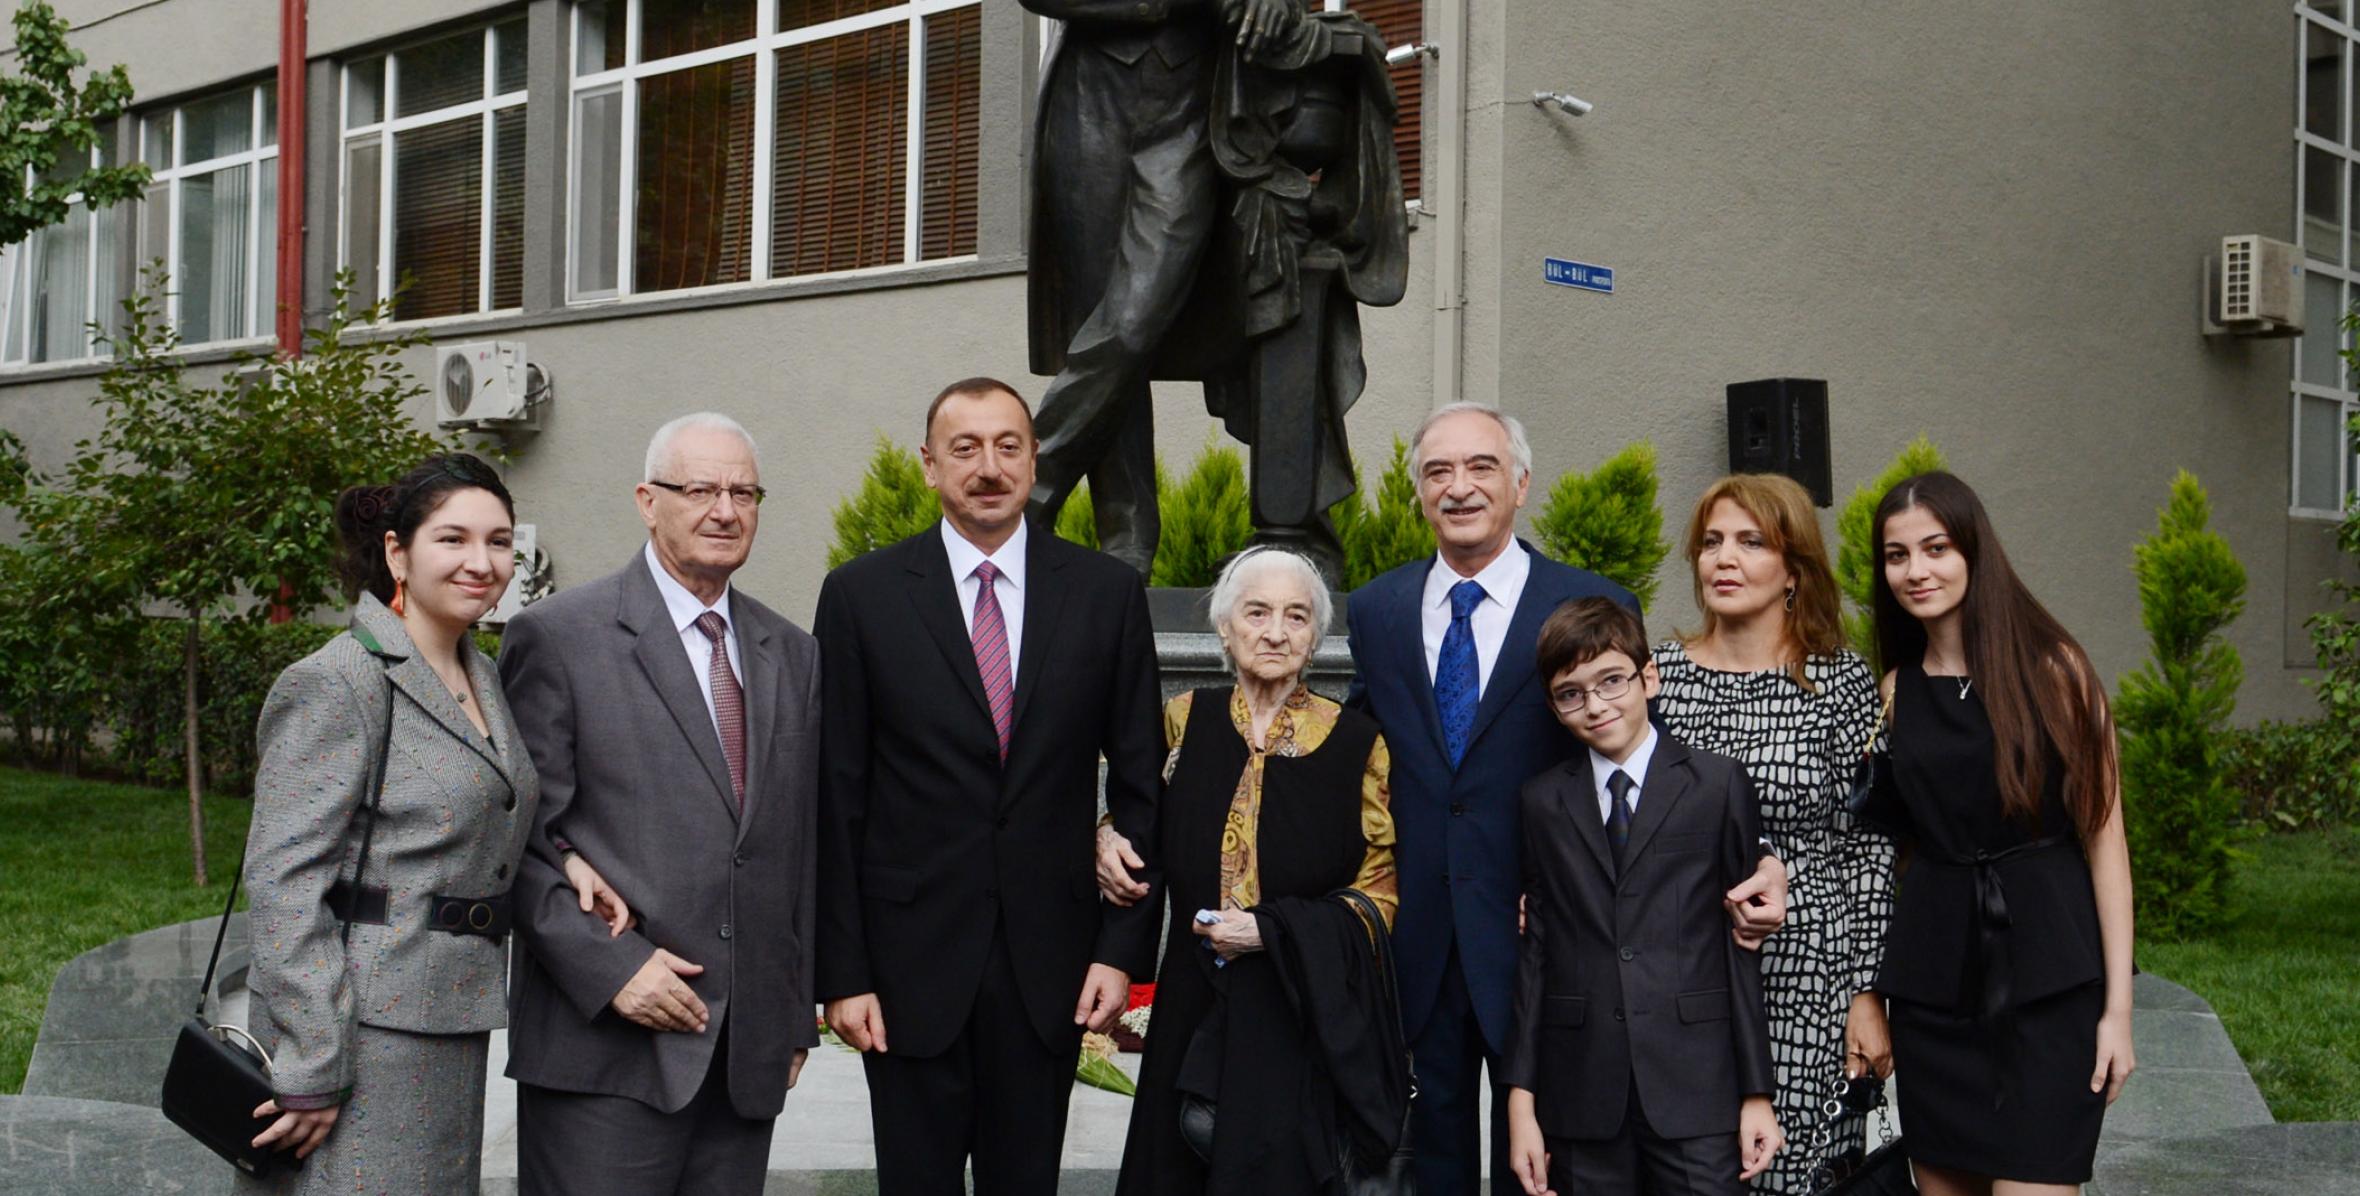 Ilham Aliyev attended a ceremony to unveil a statue of outstanding singer Bulbul